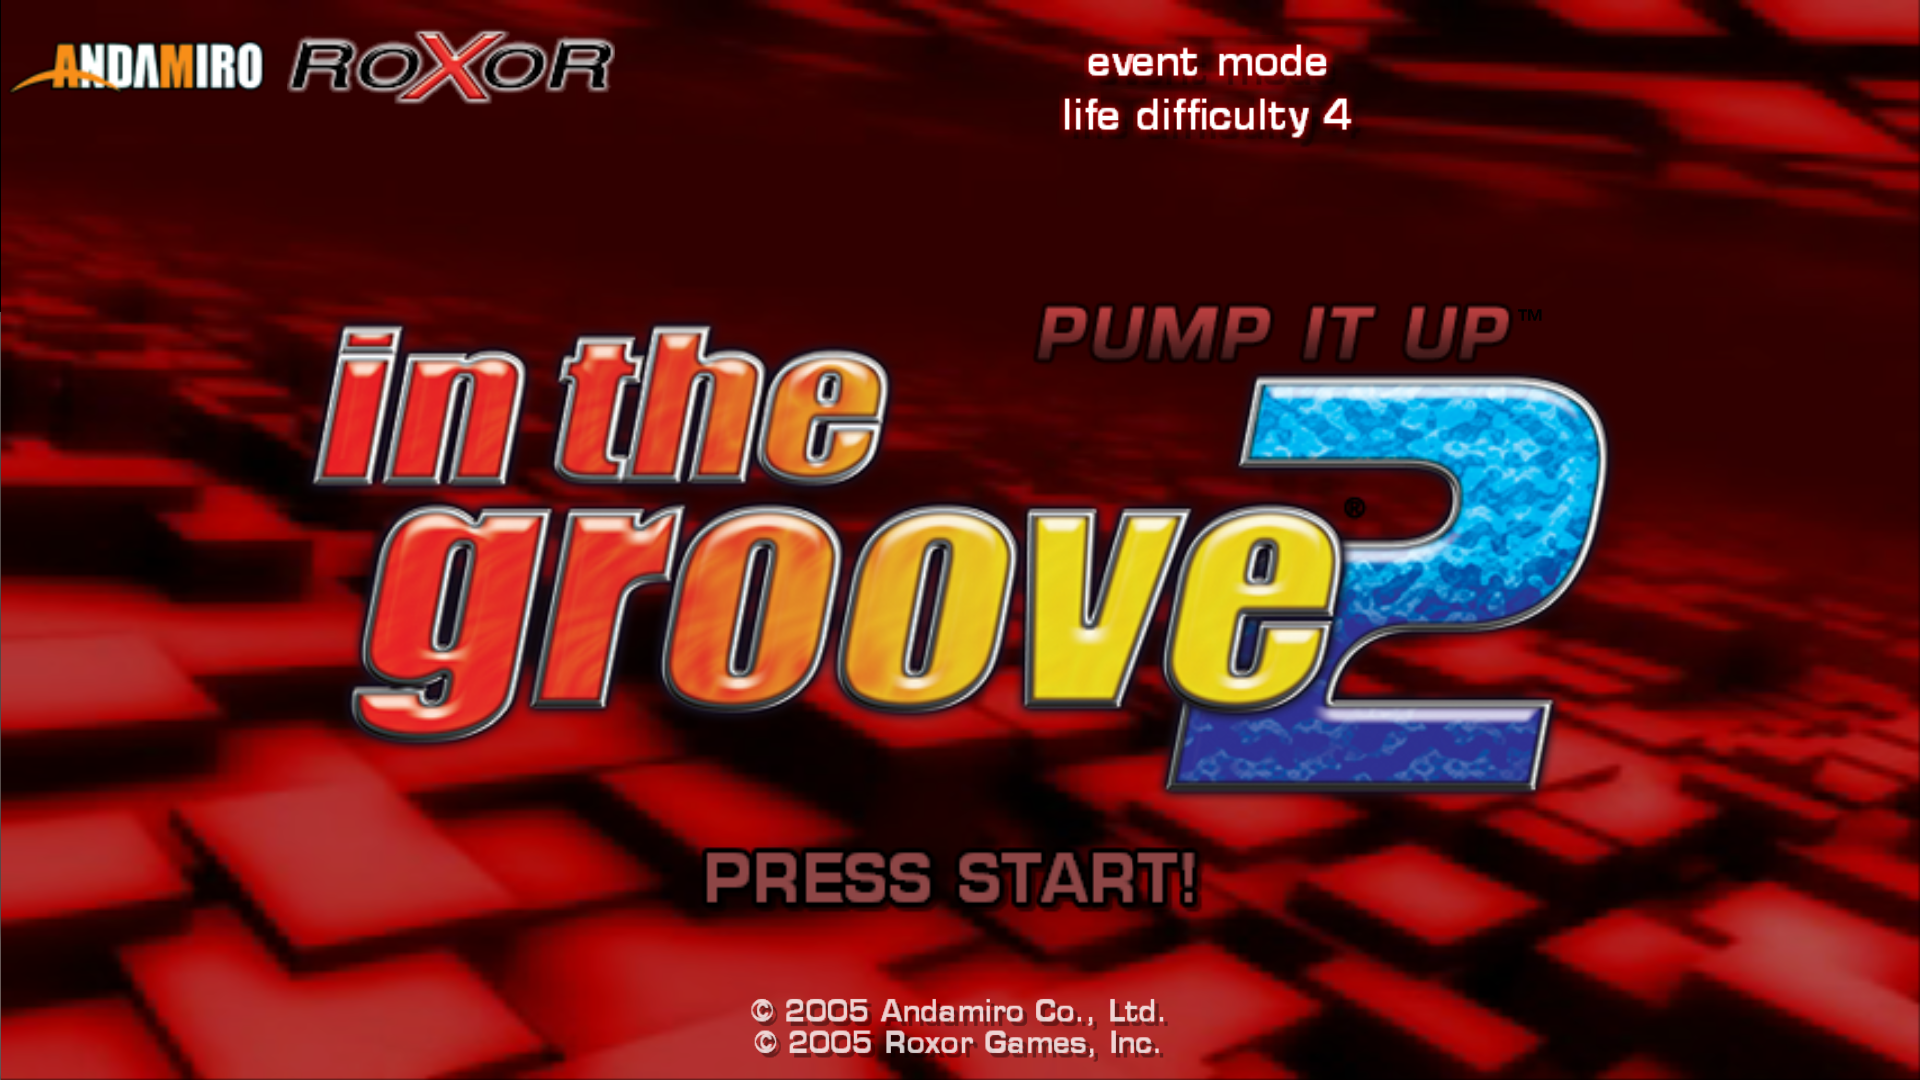 In the groove 2 pc download can you download windows 7 on a windows 10 computer